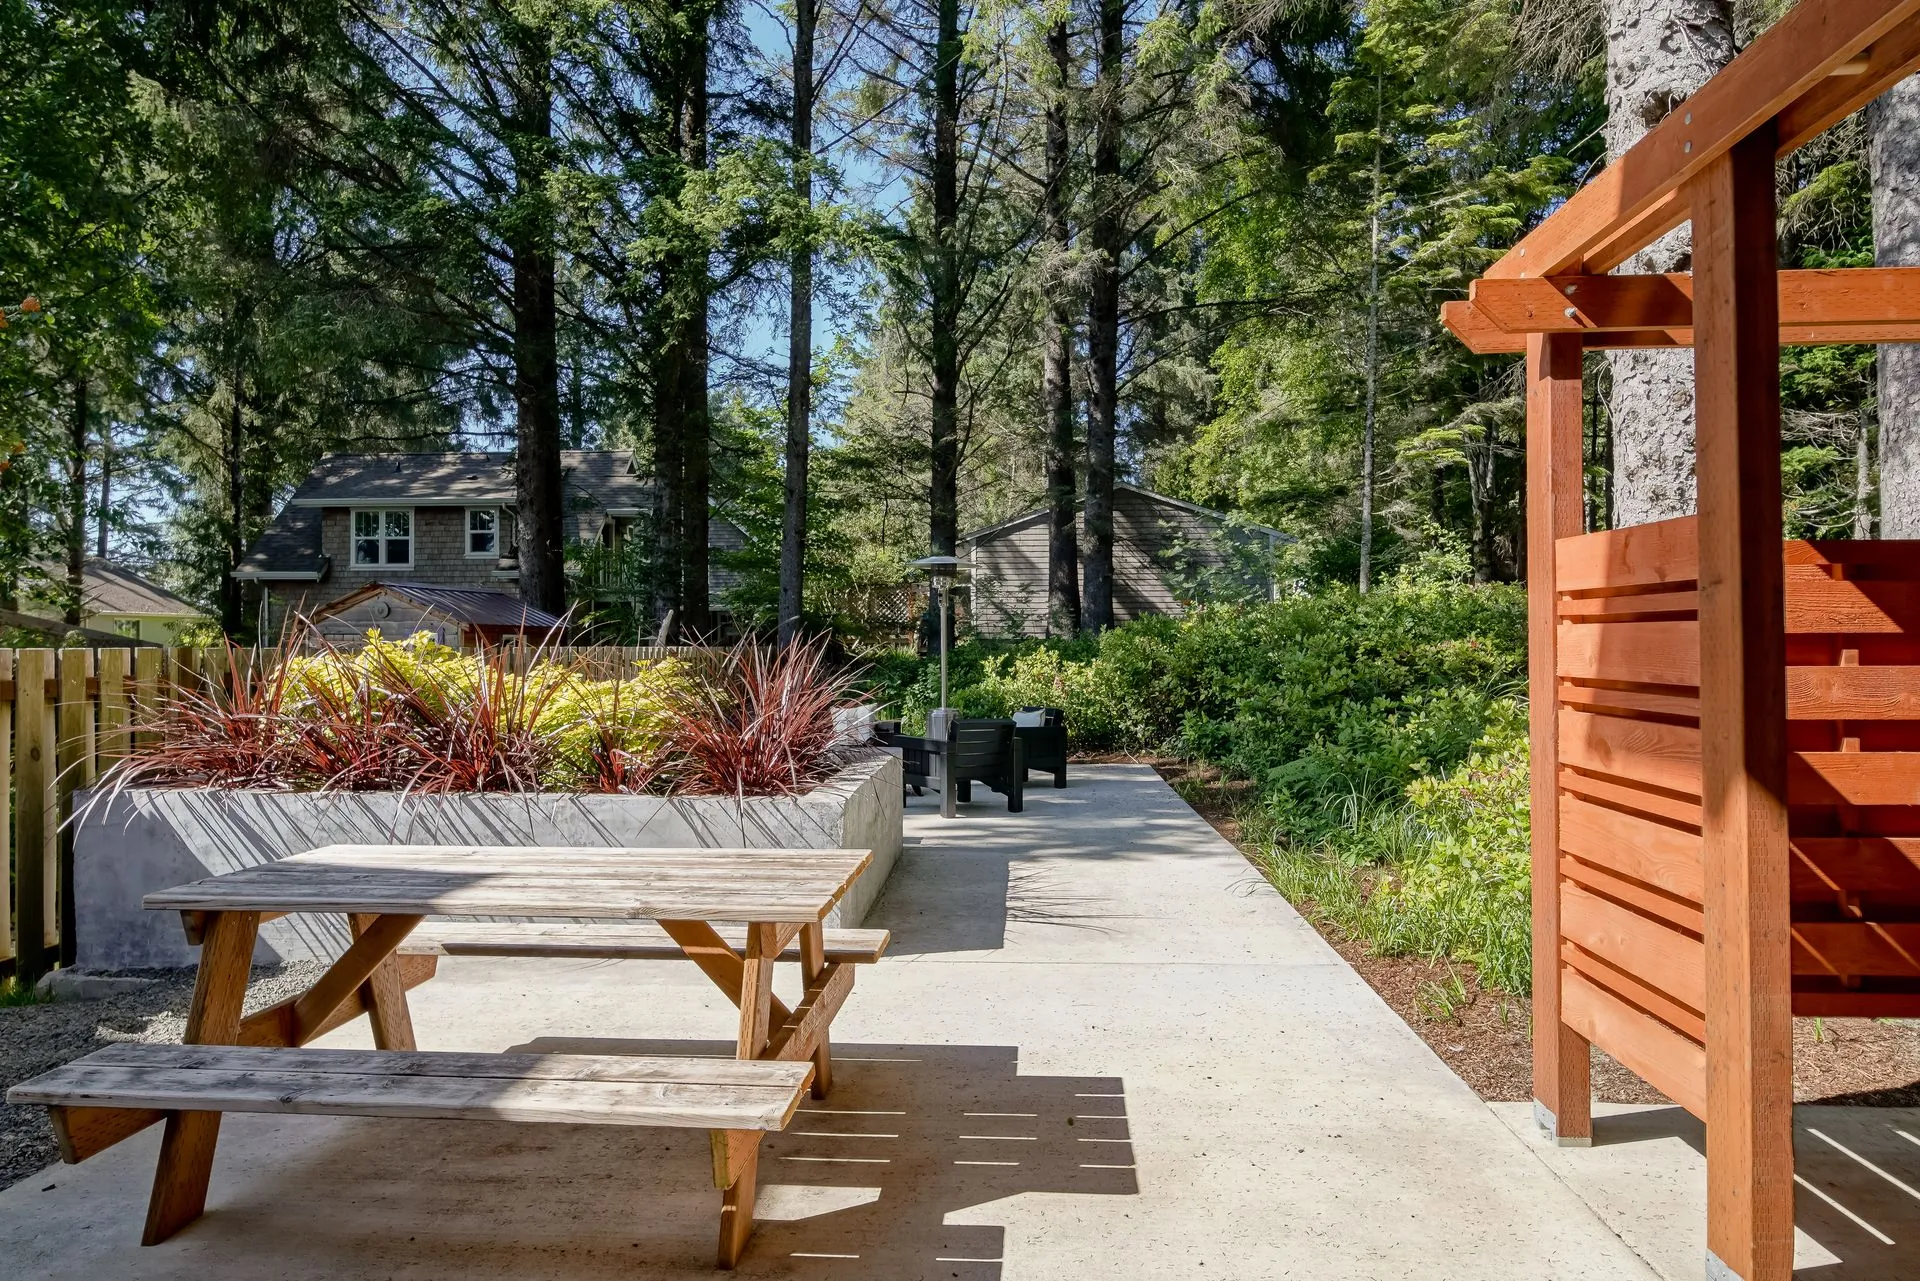 Vacation Rental in Cannon Beach, Seven Spruce picnic table